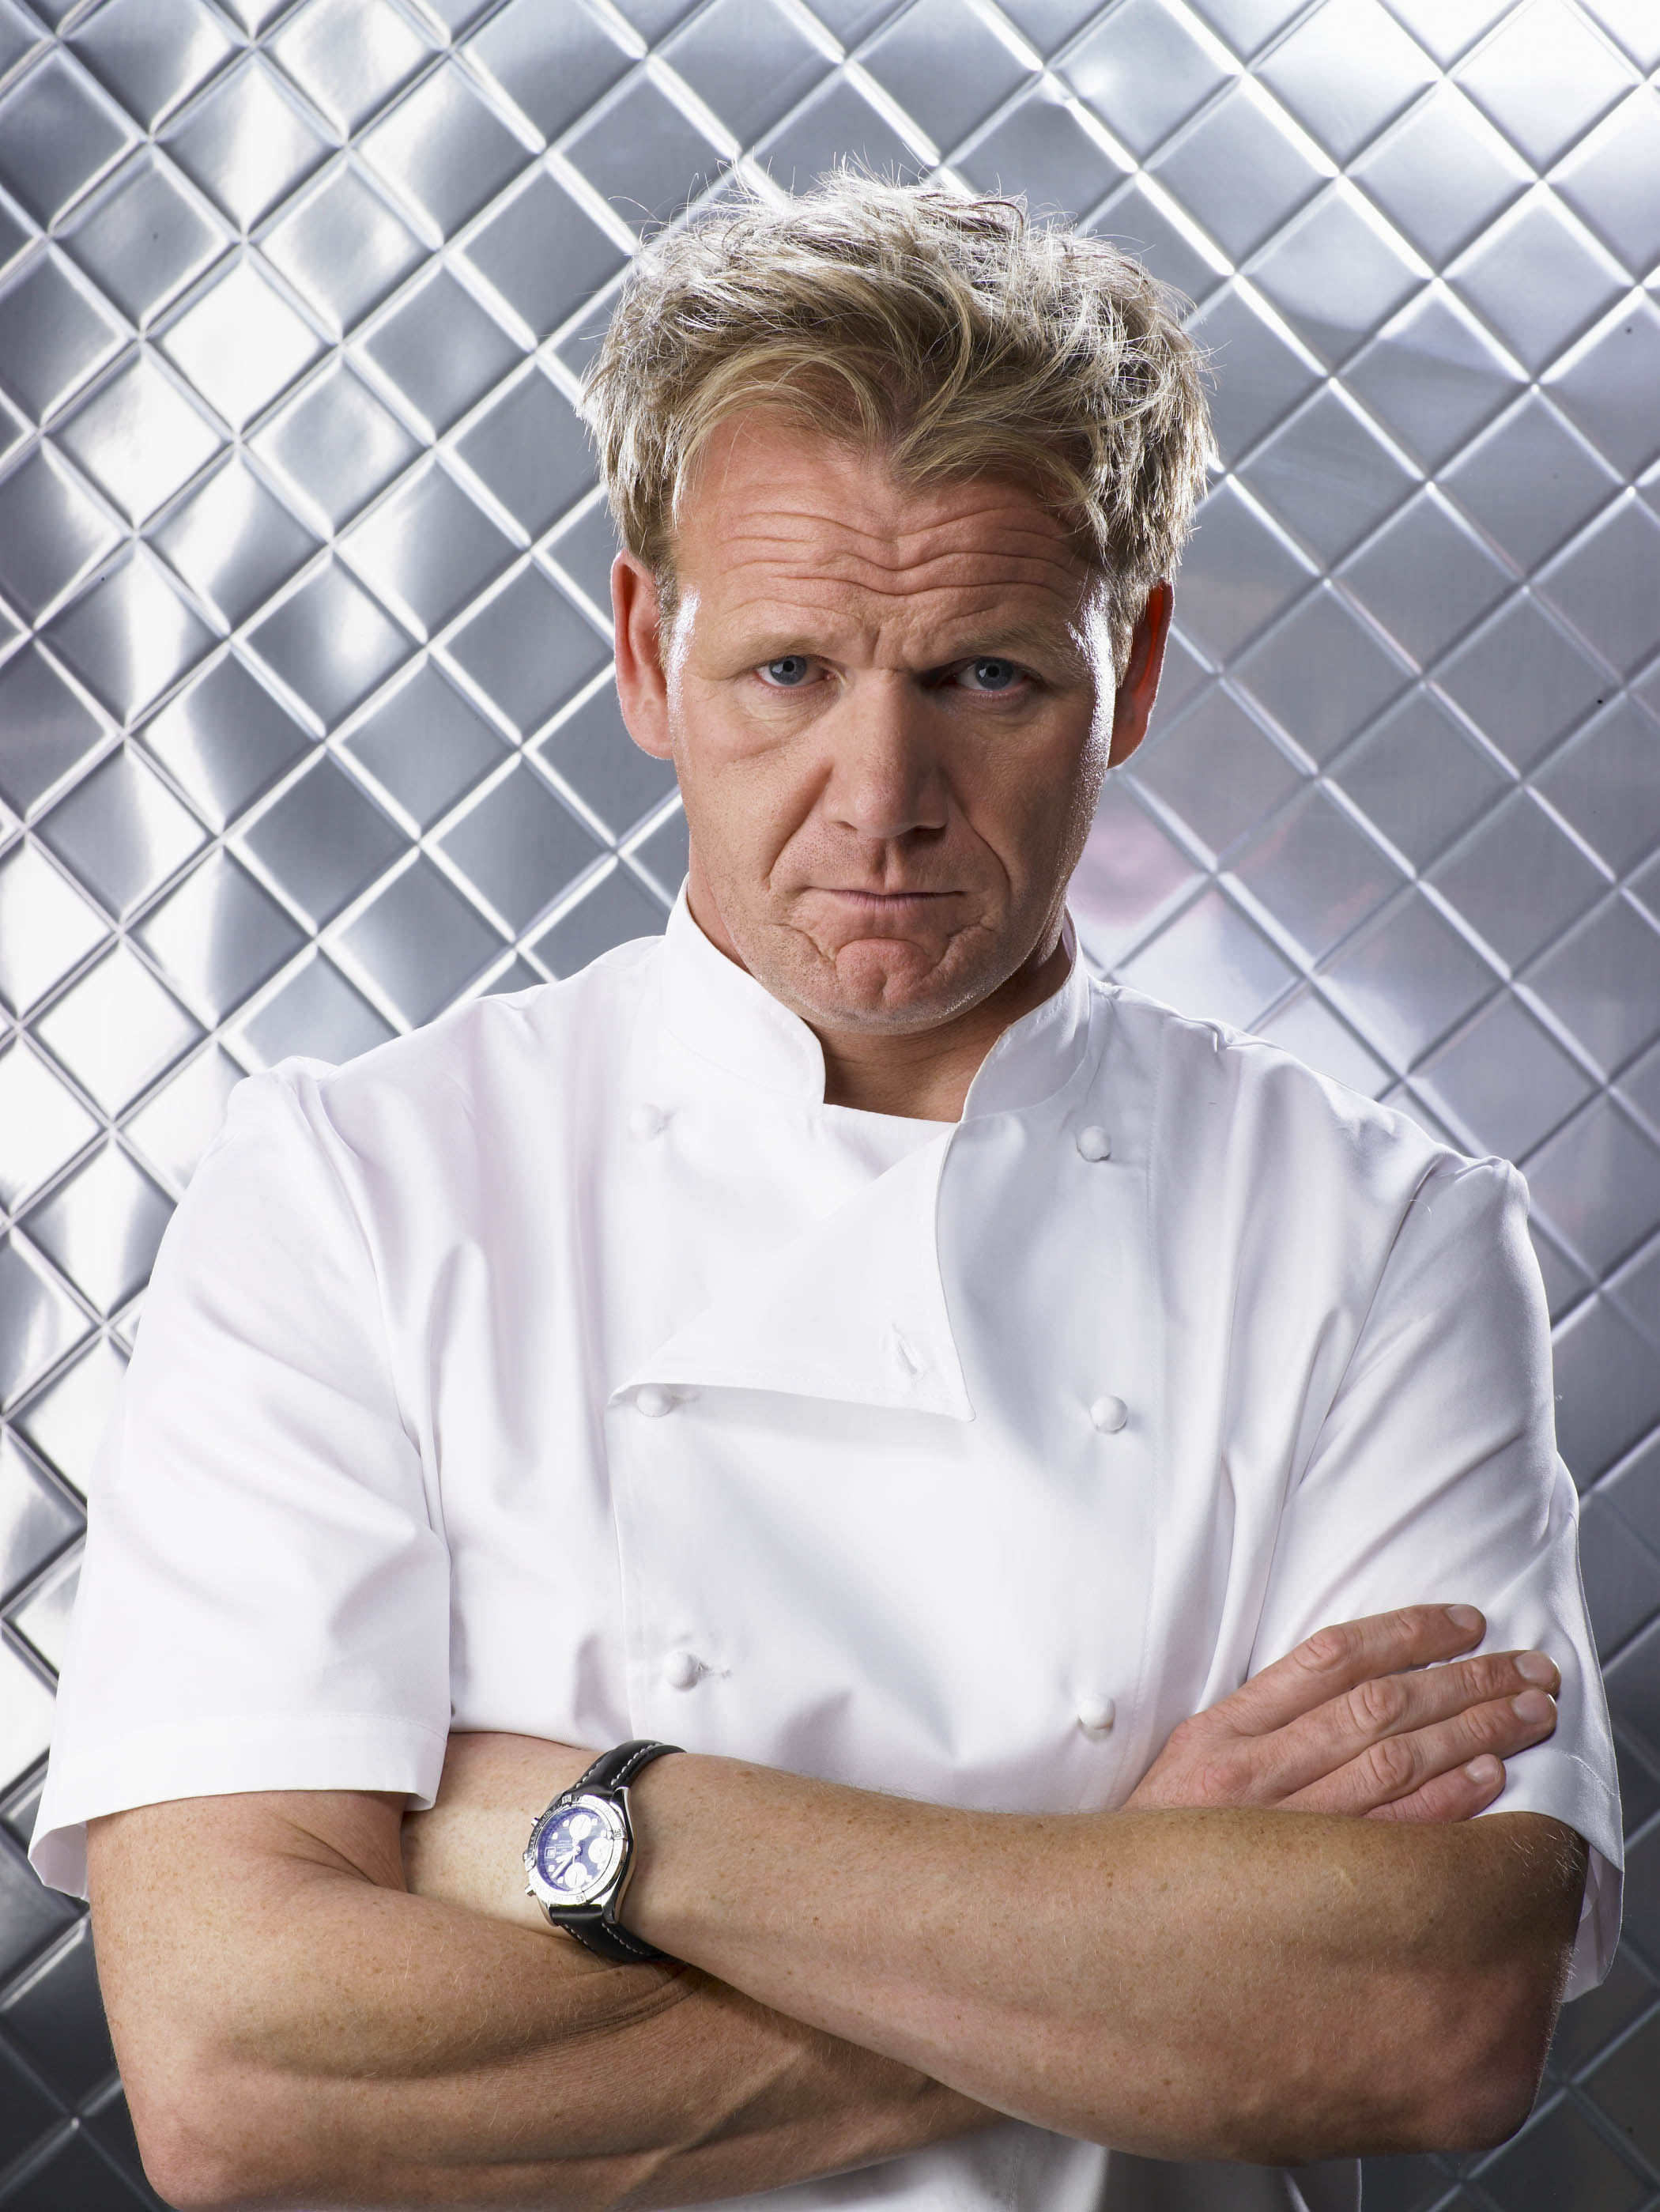 Gordon Ramsay: The owner of a restaurant group that has been awarded 17 Michelin stars. 2100x2800 HD Wallpaper.